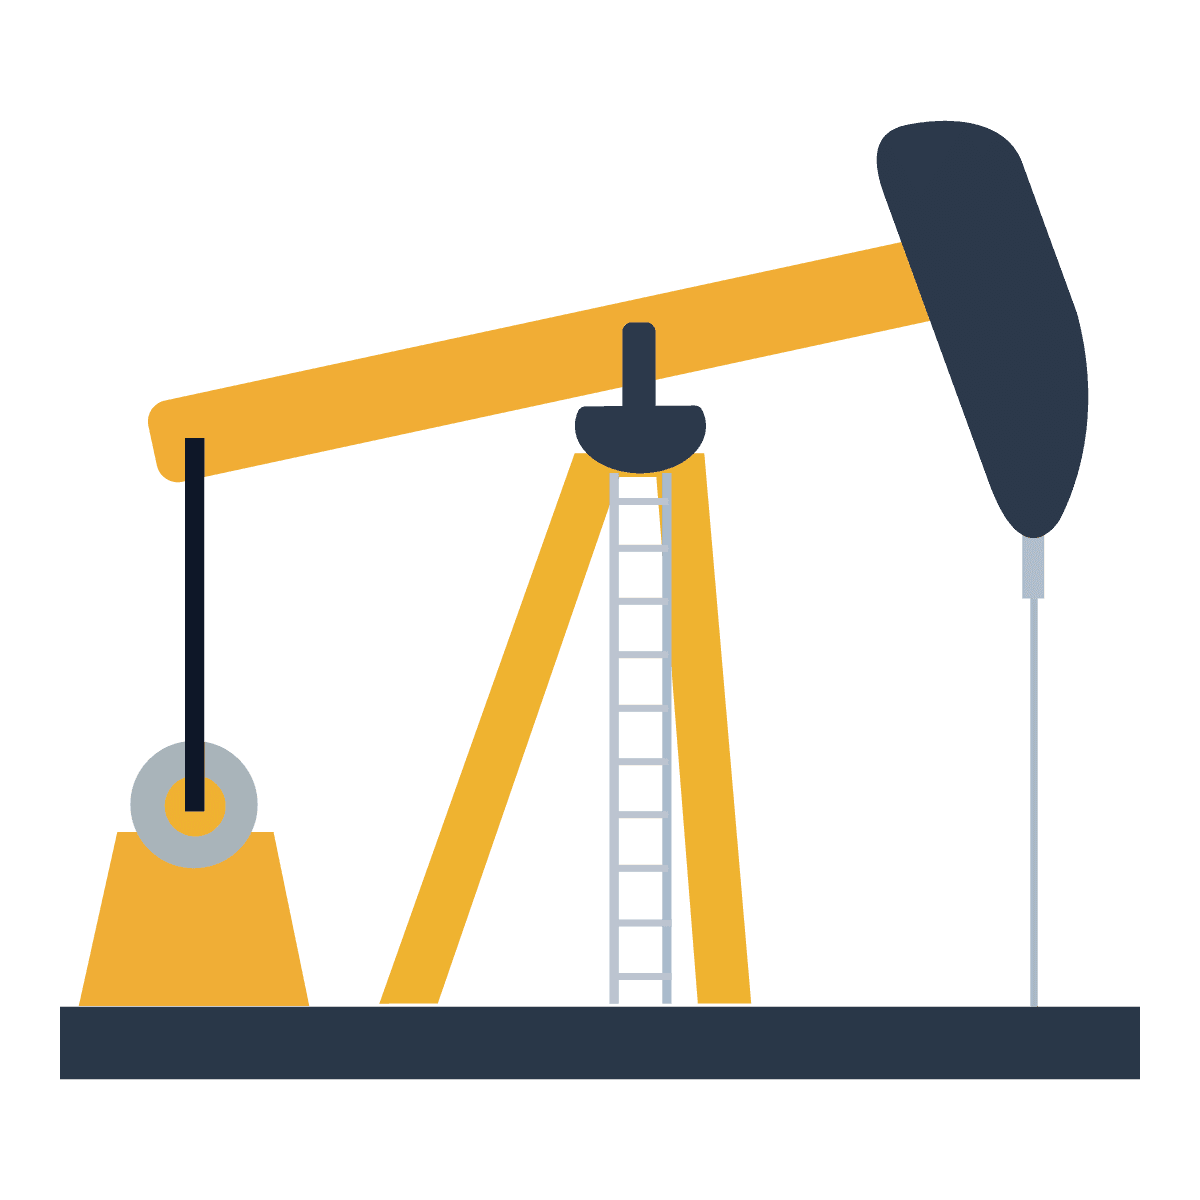 industrial icons for safety and equipment in oil & gas industry